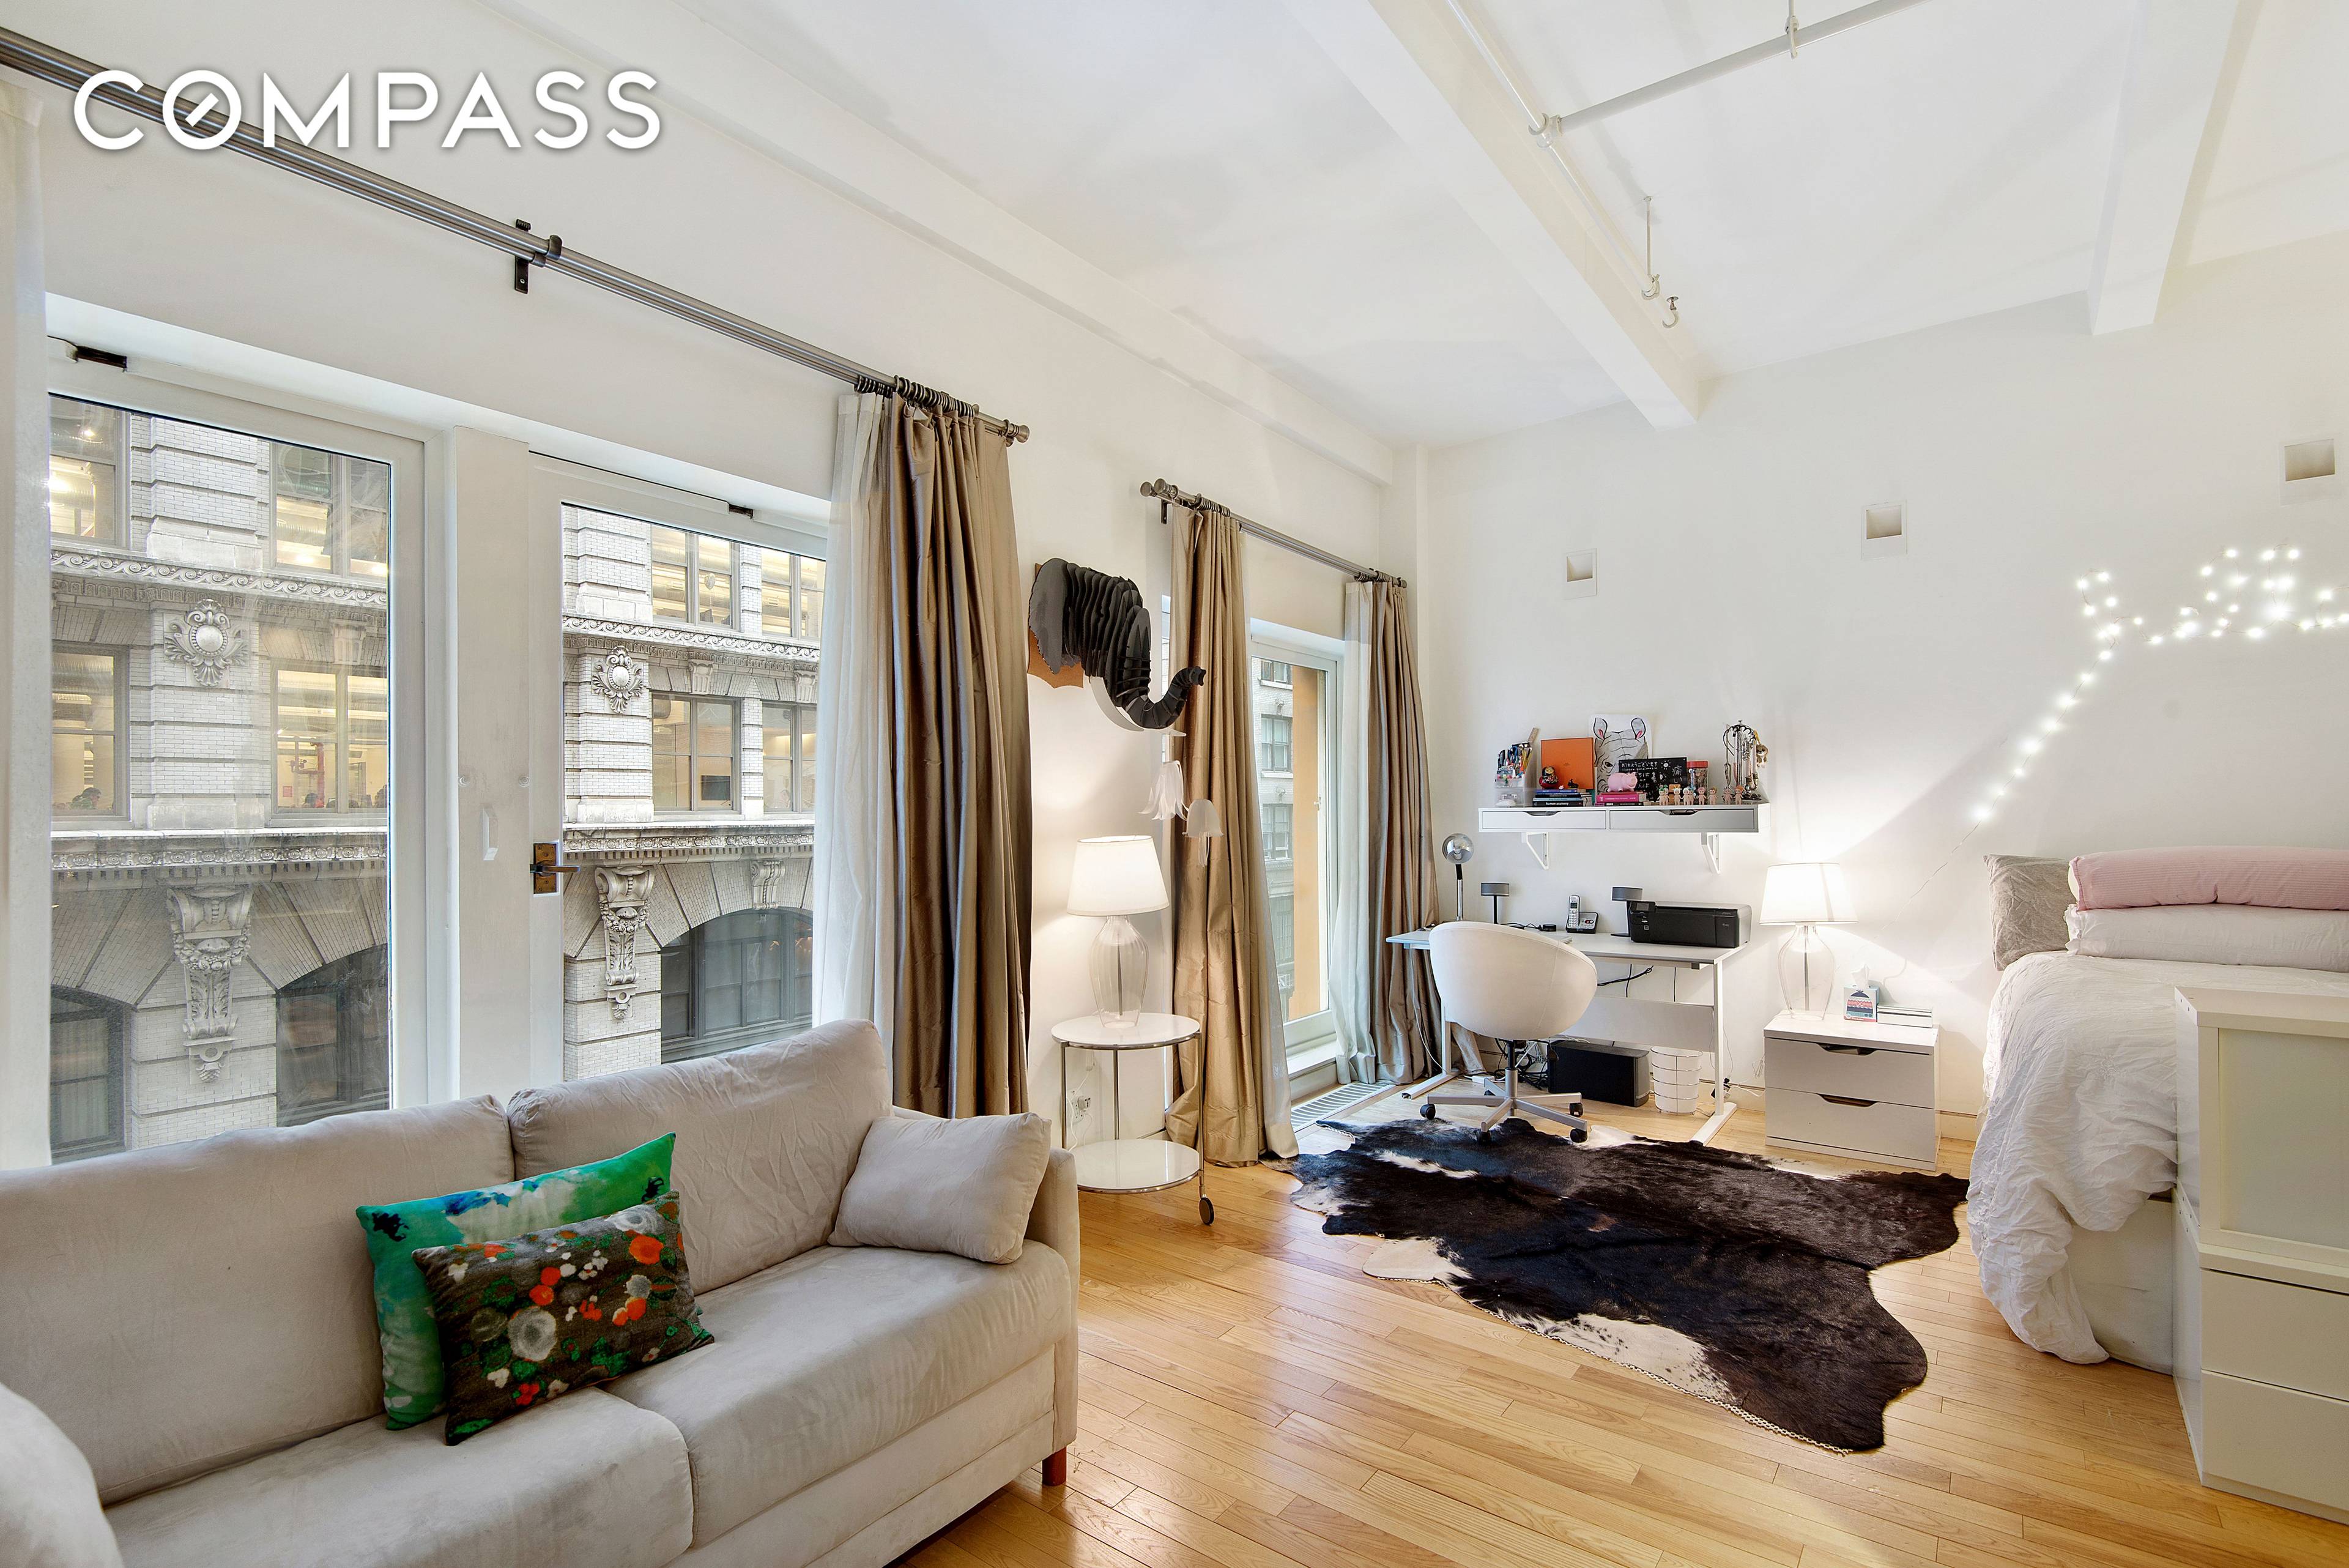 April 1st, Move In. Dolce Vita and modernity awaits a discerned renter in this alluring residence, strategically located in the Flatiron district.